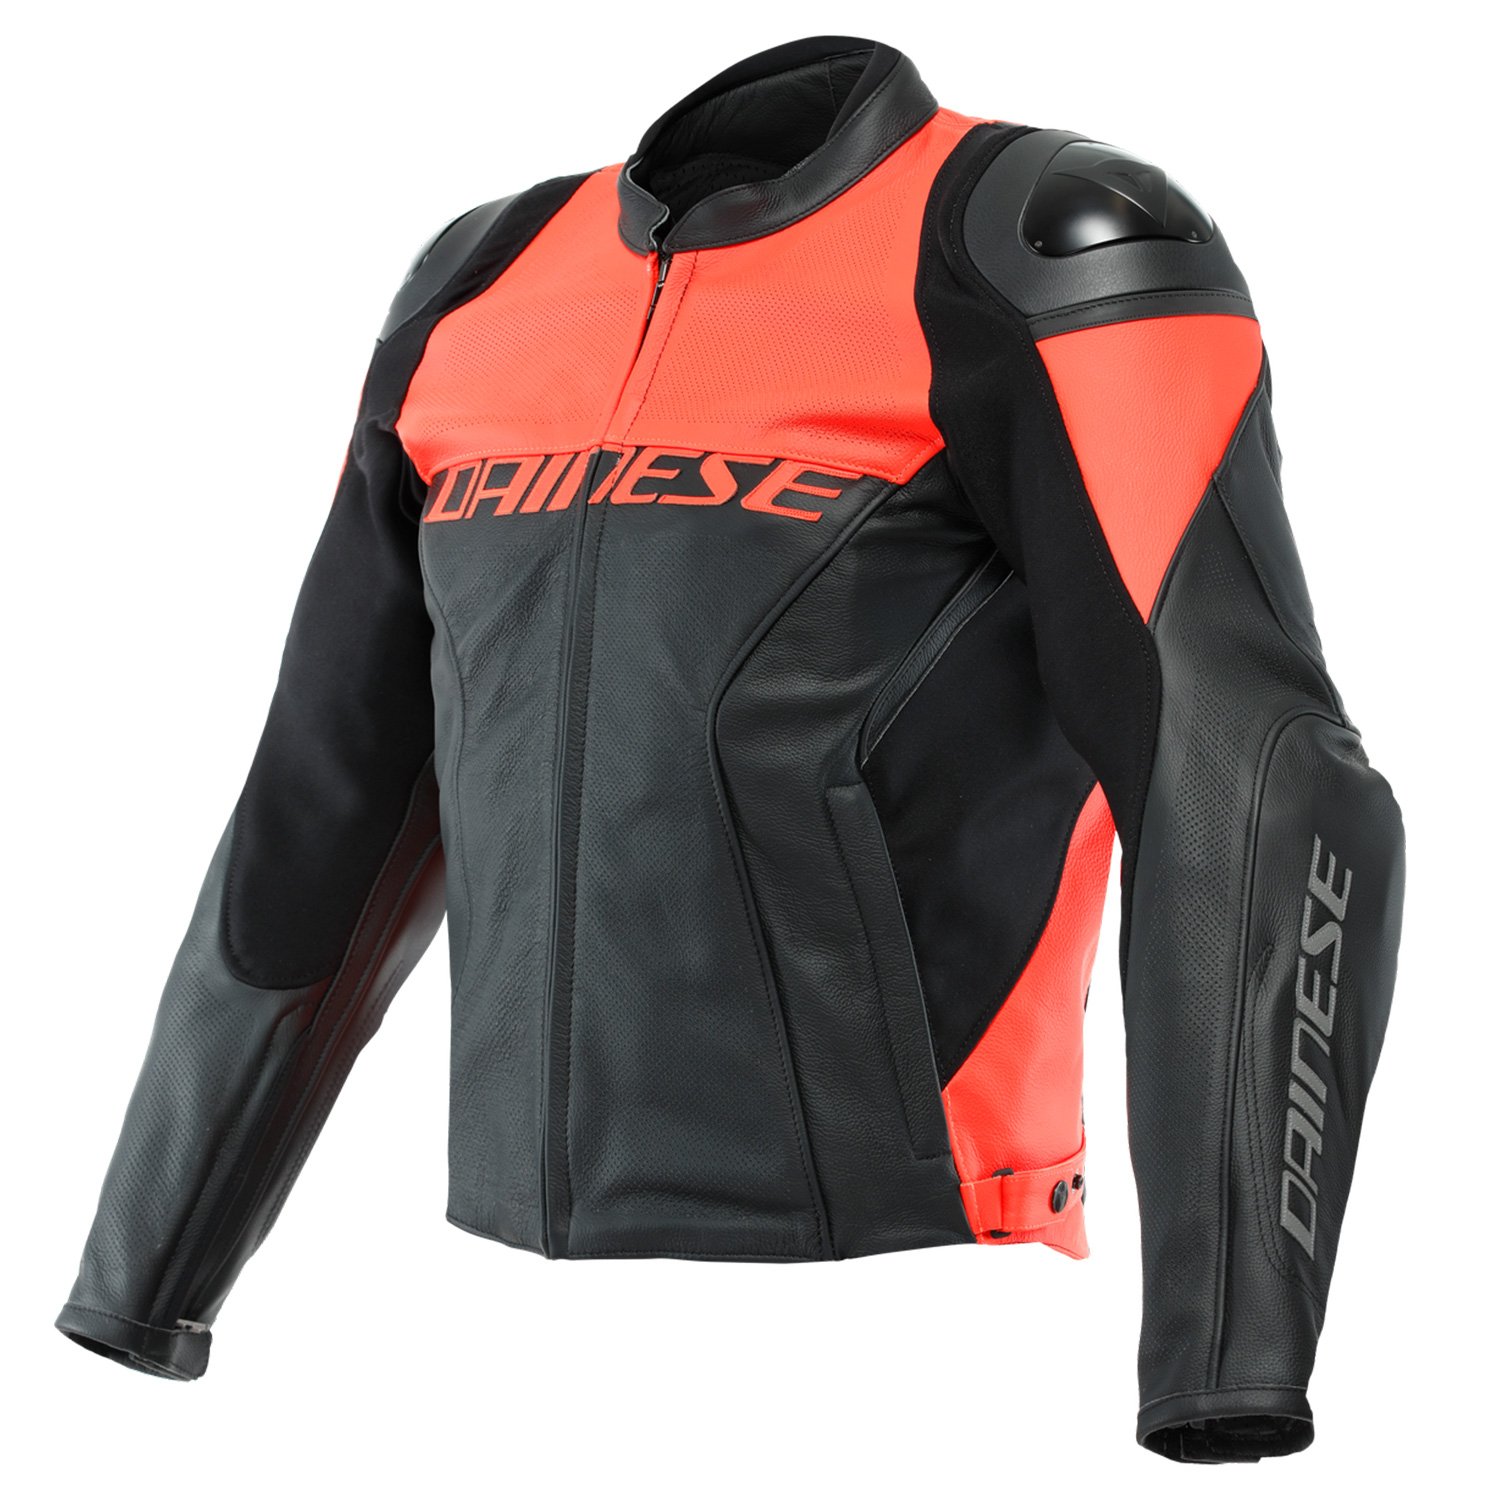 Image of Dainese Racing 4 Perforated Leather Schwarz Fluo Rot Jacke Größe 48